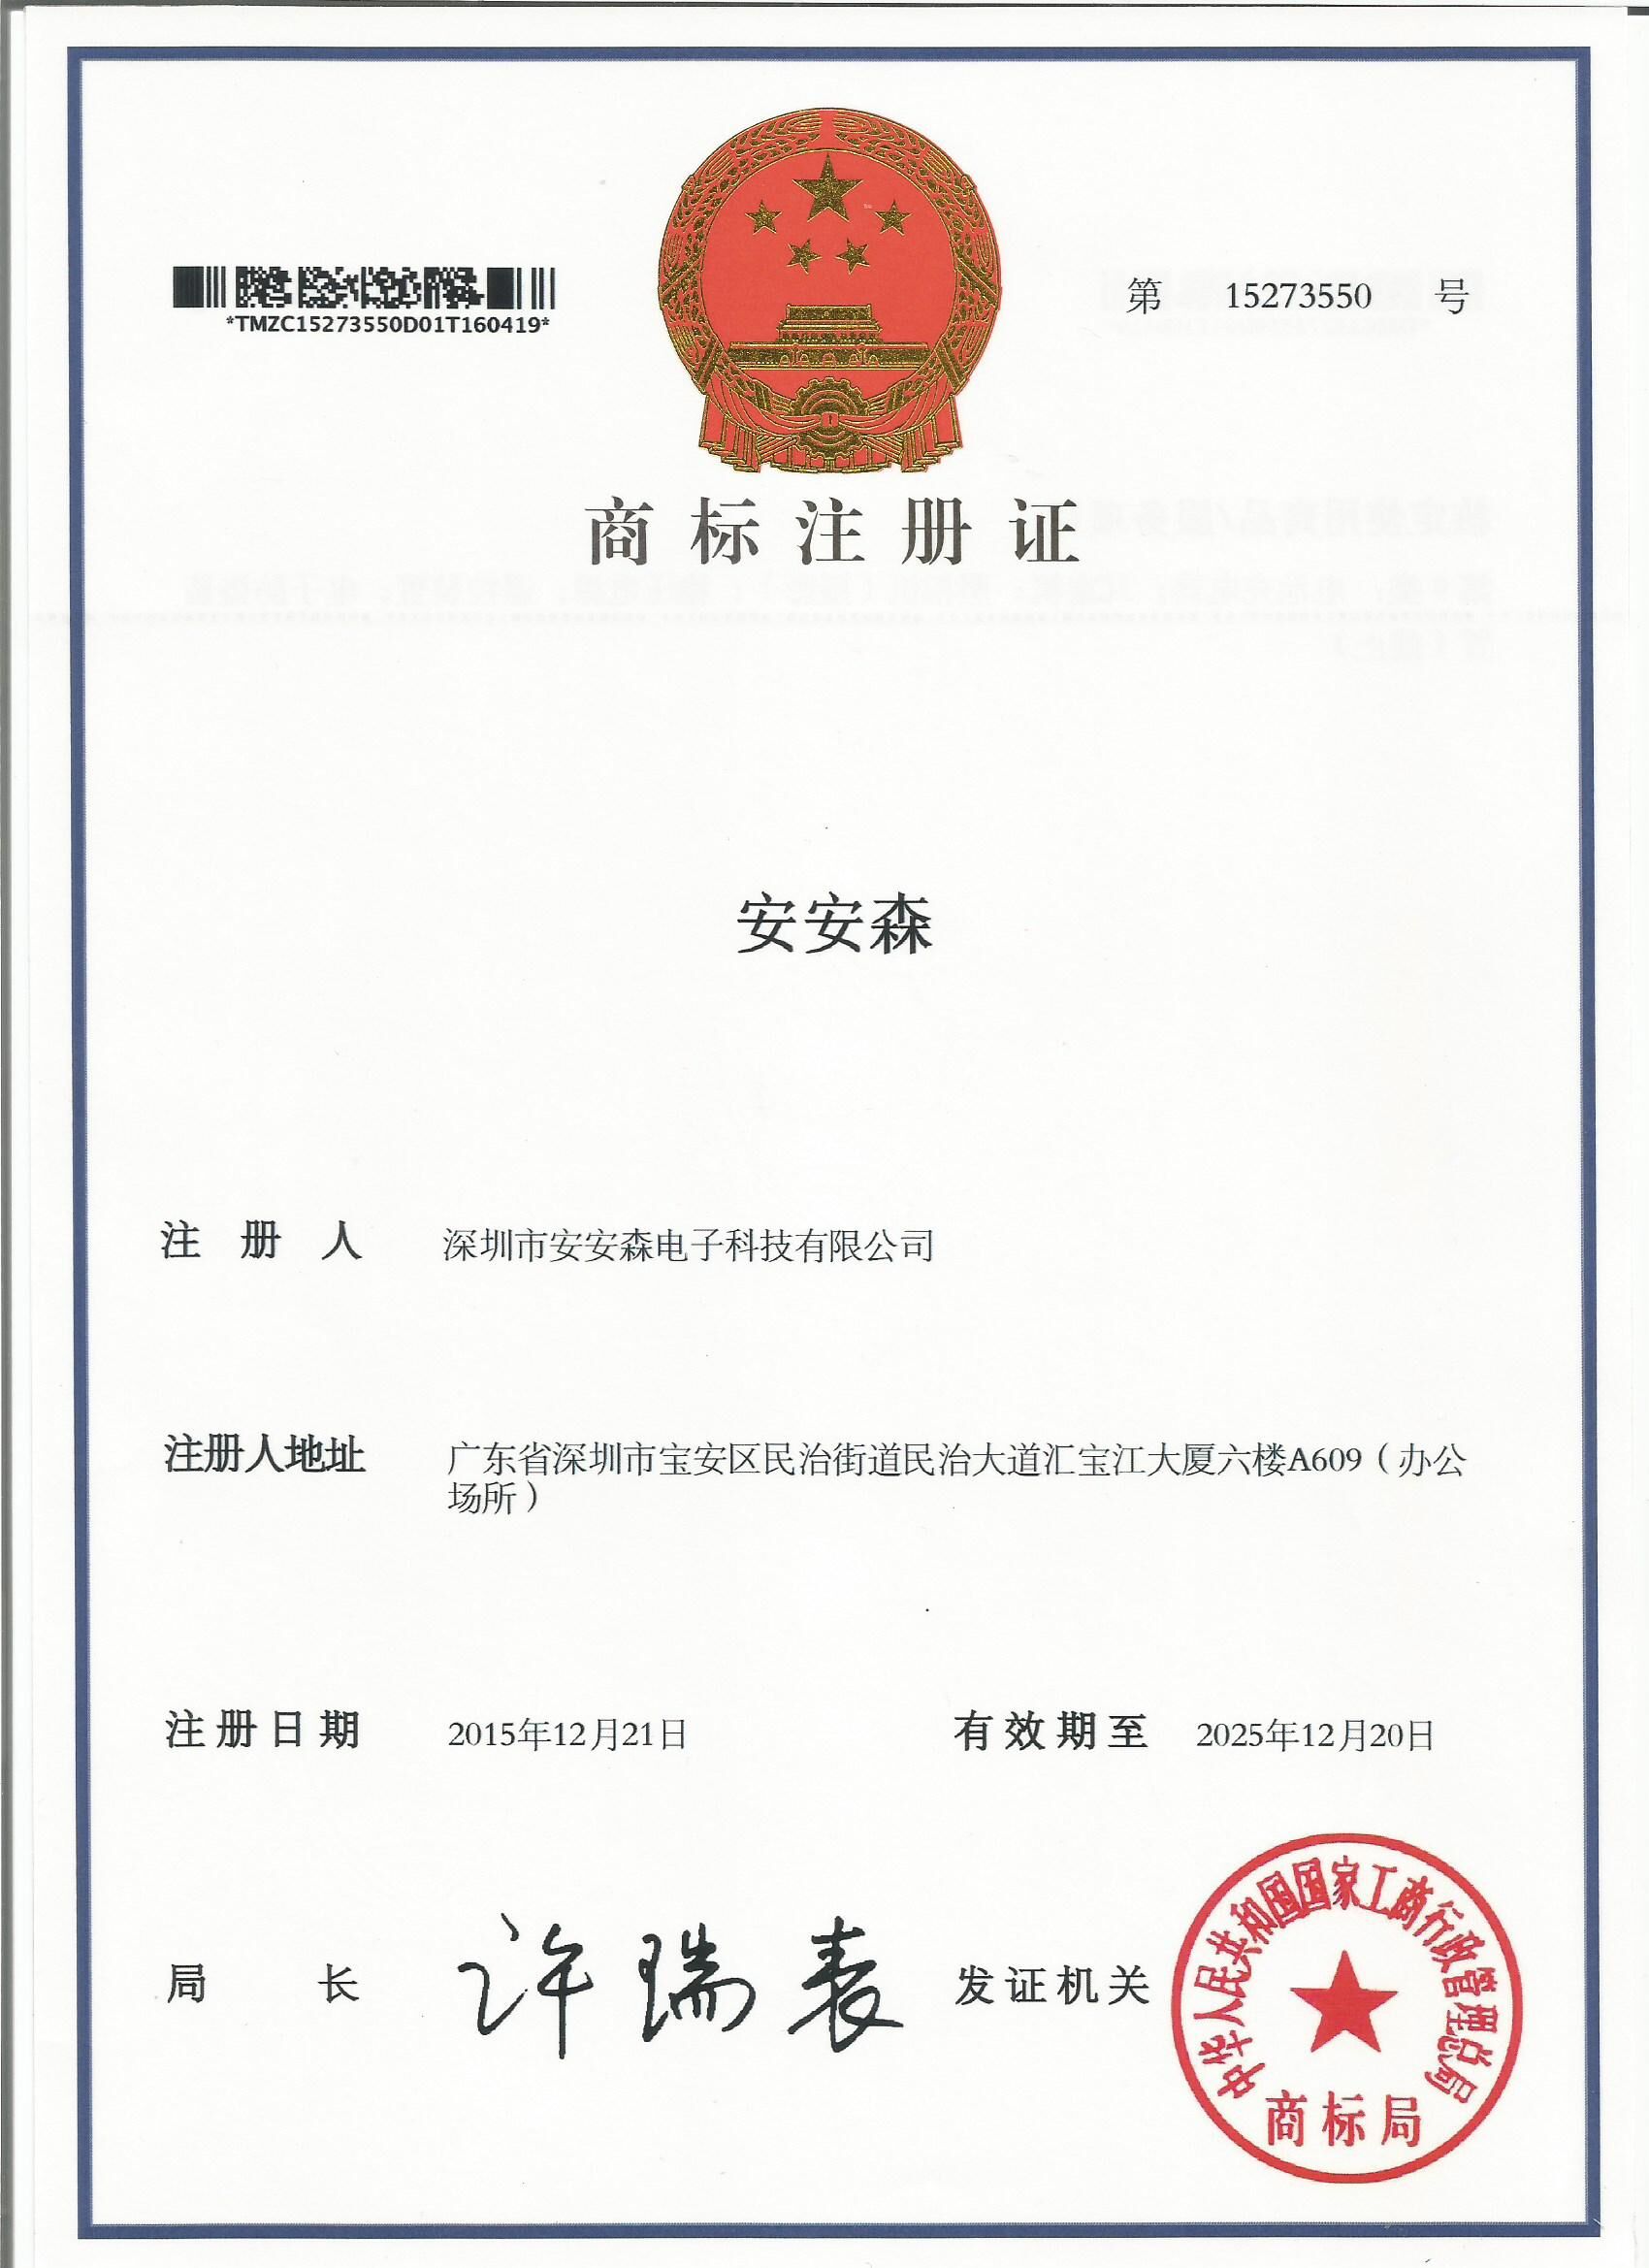 A&S Power Chinese trademark for 9th section